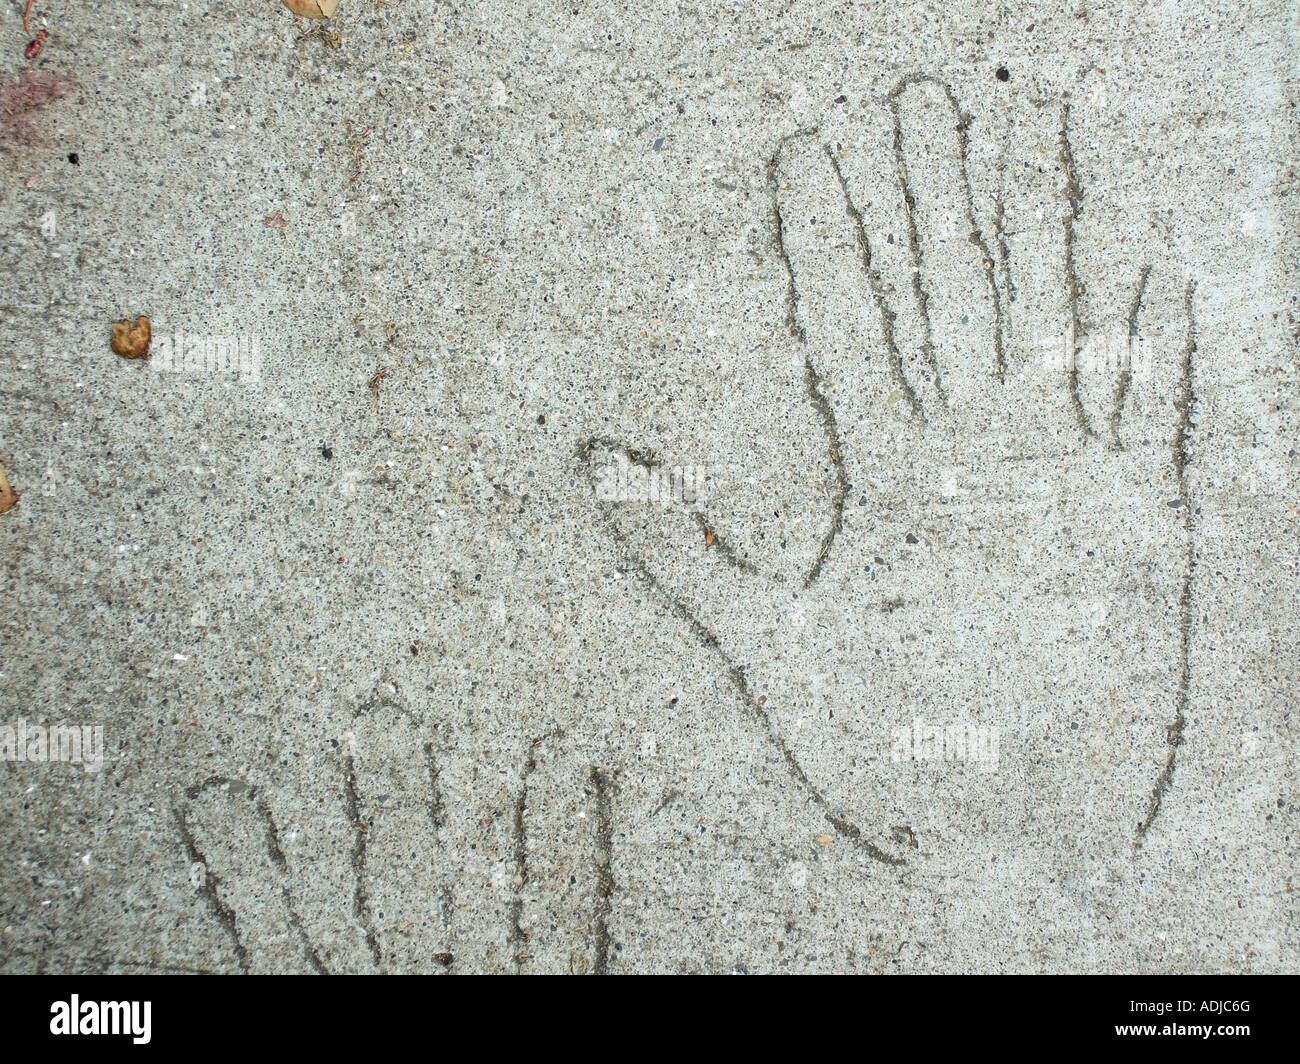 '^Outline of hands scratched in cement on ^sidewalk'. Stock Photo